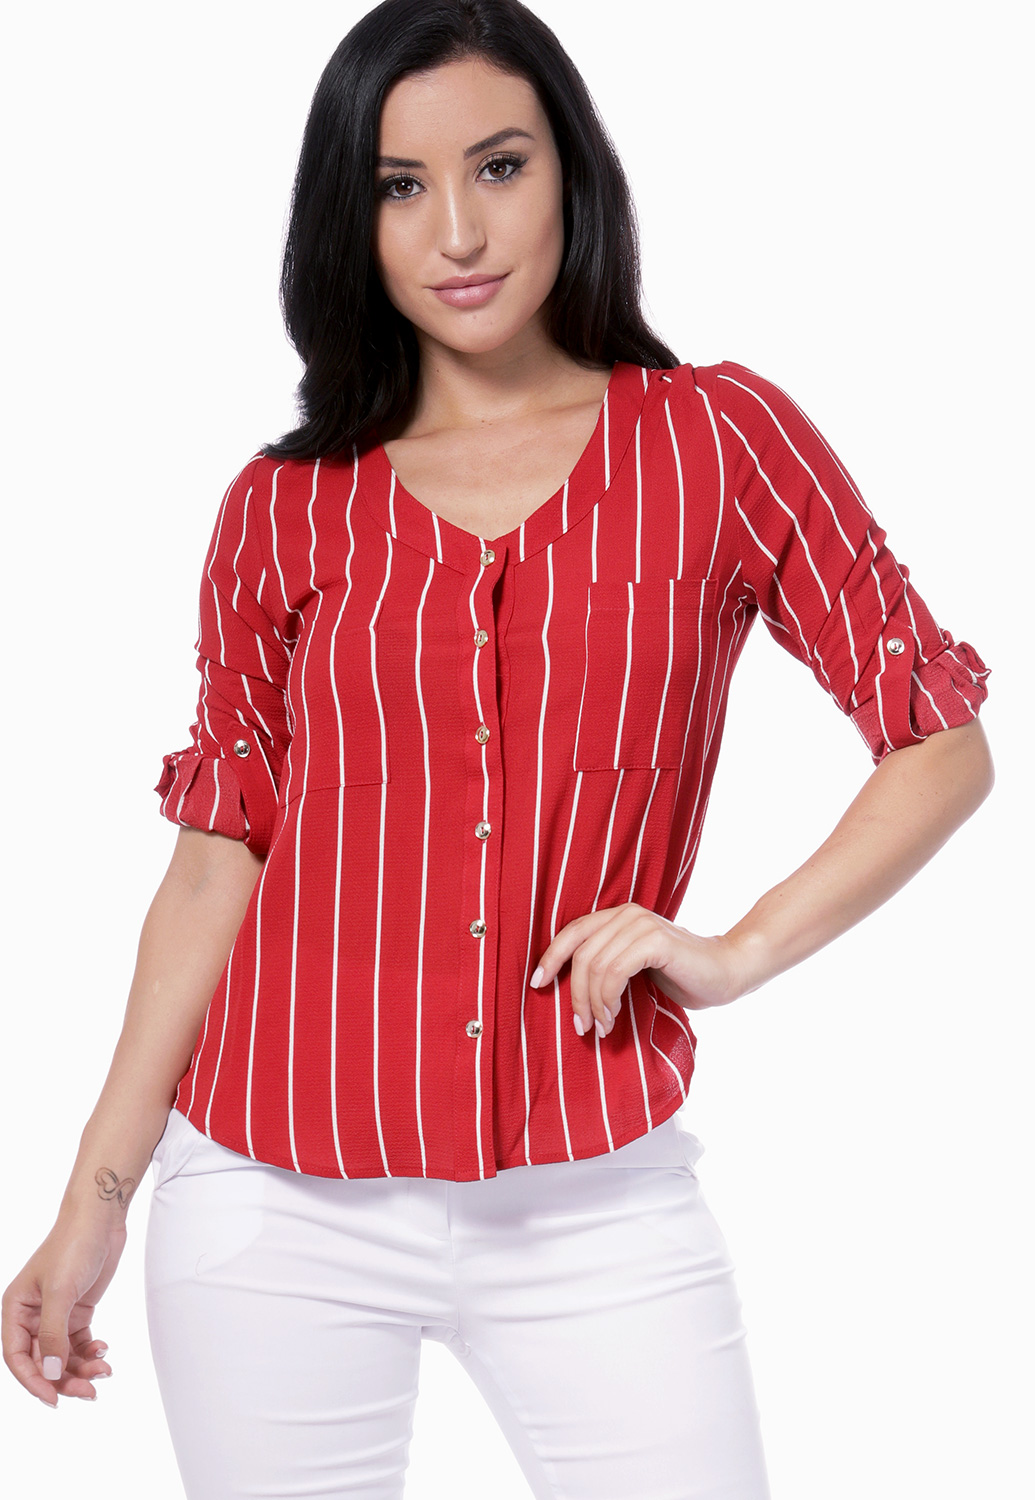 Pinstriped Long Sleeve Dressy Blouse